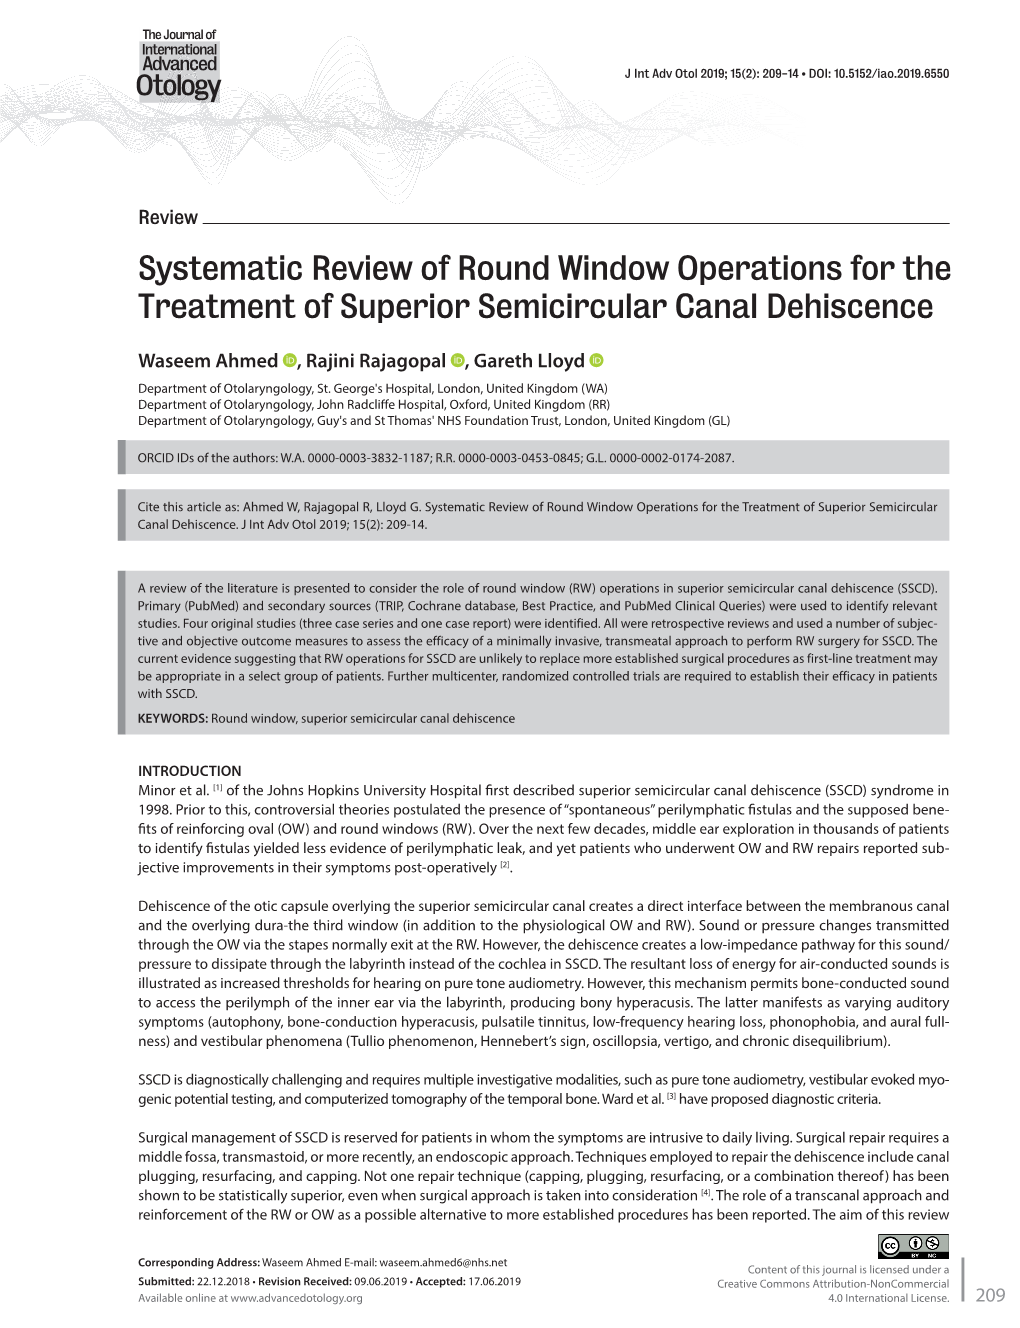 Systematic Review of Round Window Operations for the Treatment of Superior Semicircular Canal Dehiscence